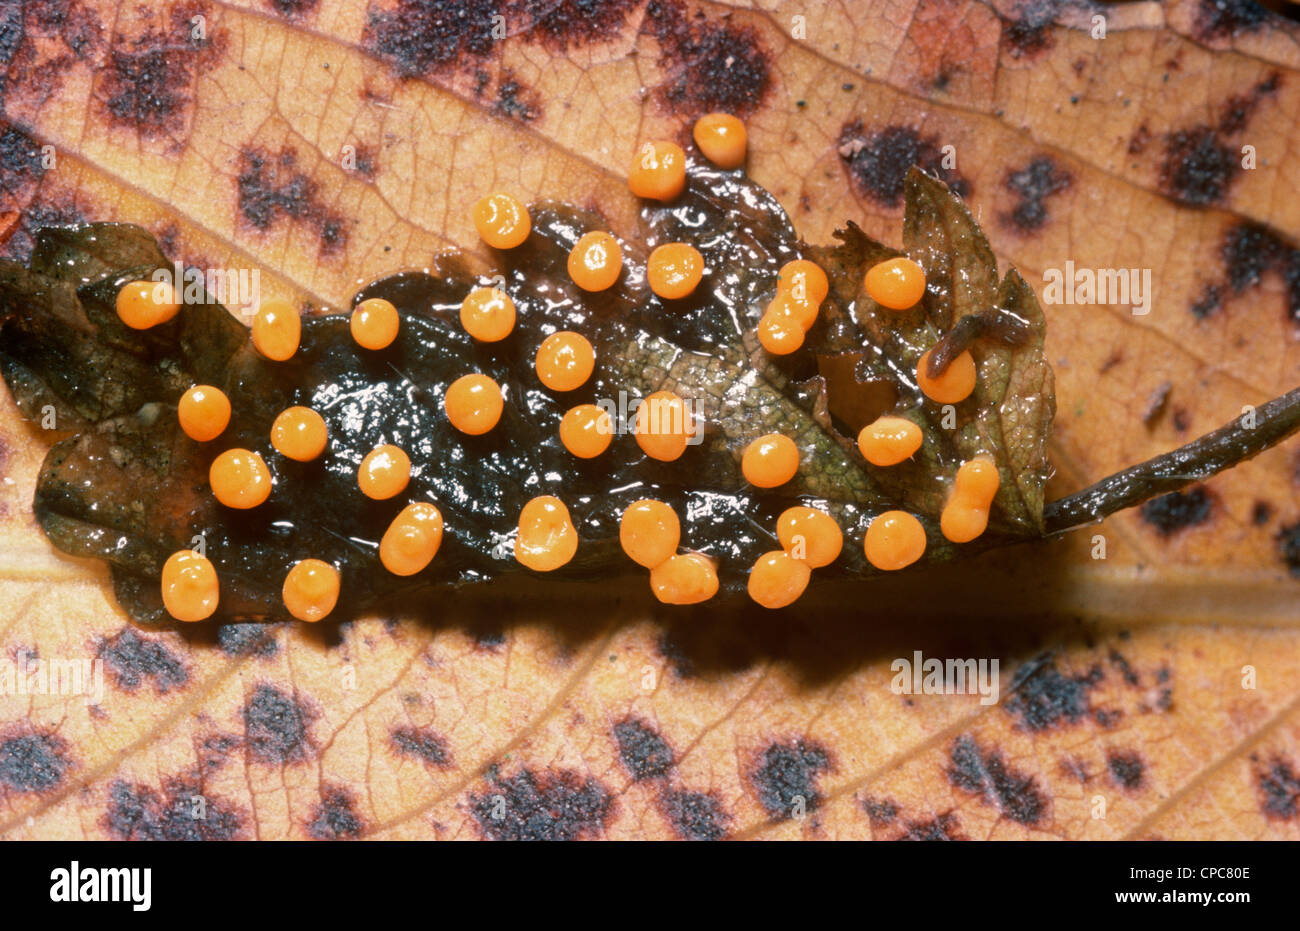 Slime mould (Craterium minutum), fruiting bodies on a fallen leaf UK Stock Photo